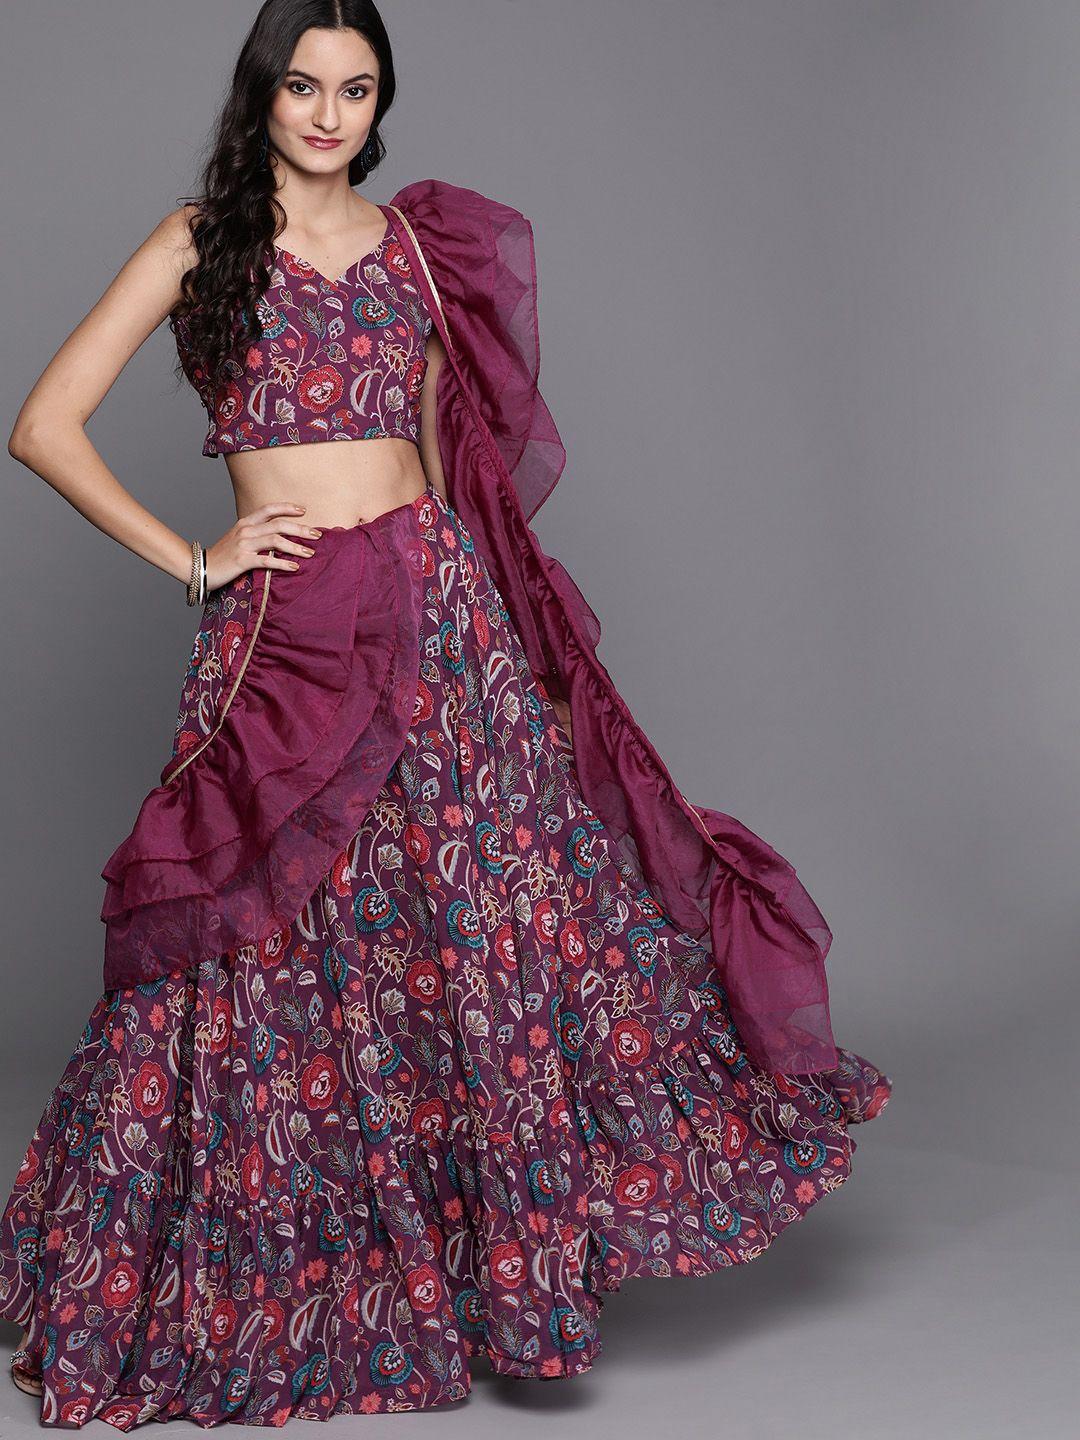 inddus women purple & red printed top & skirt with ruffled dupatta